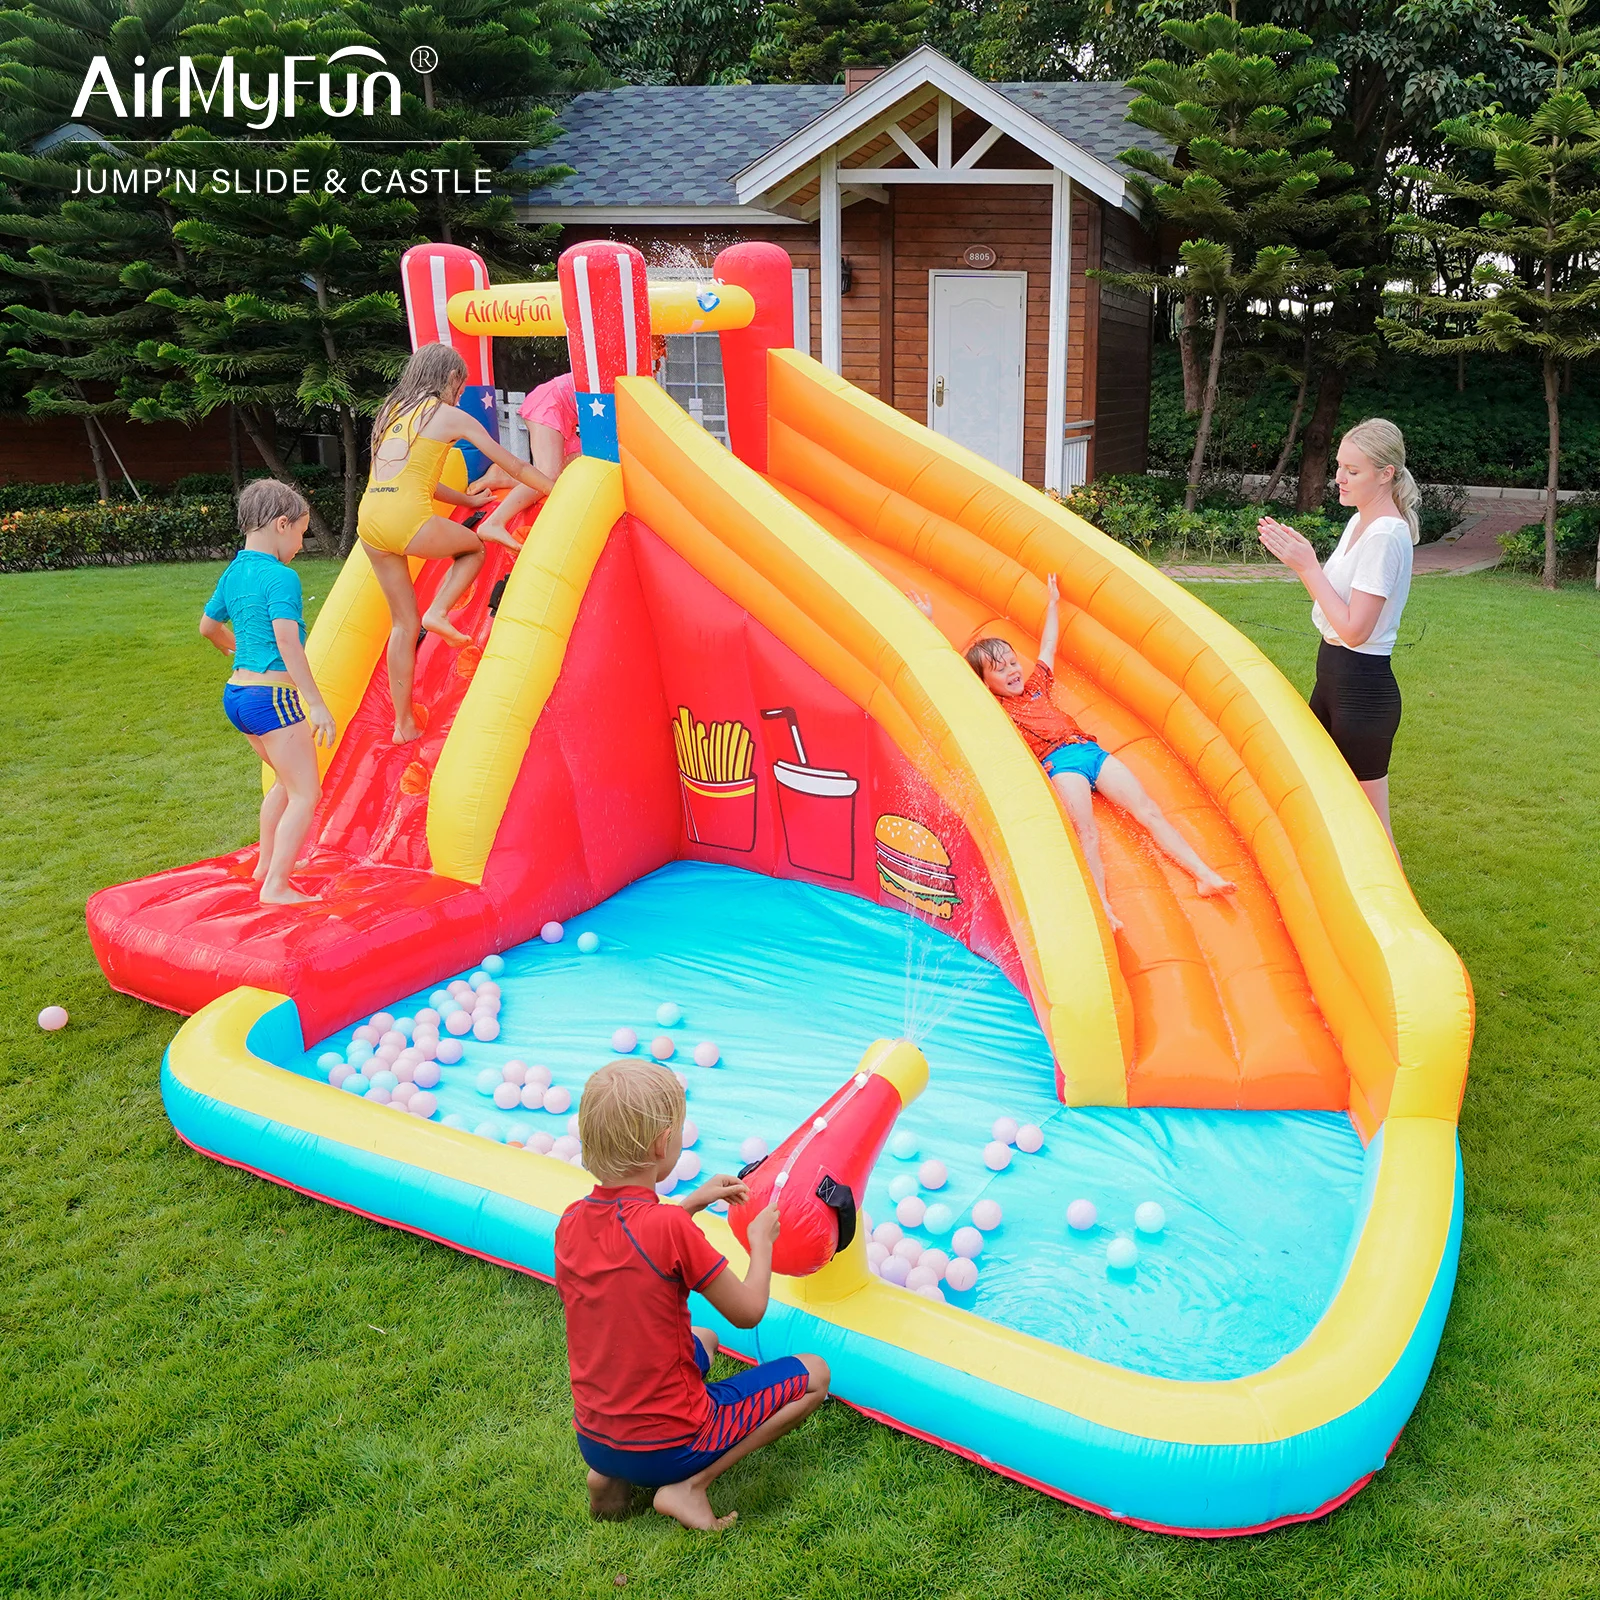 

Factory Hot Sale Popular Fun Combo Inflatable Water Slide Jumping Bouncy Castle With Pool Jumping Castle Bounce House For Kids